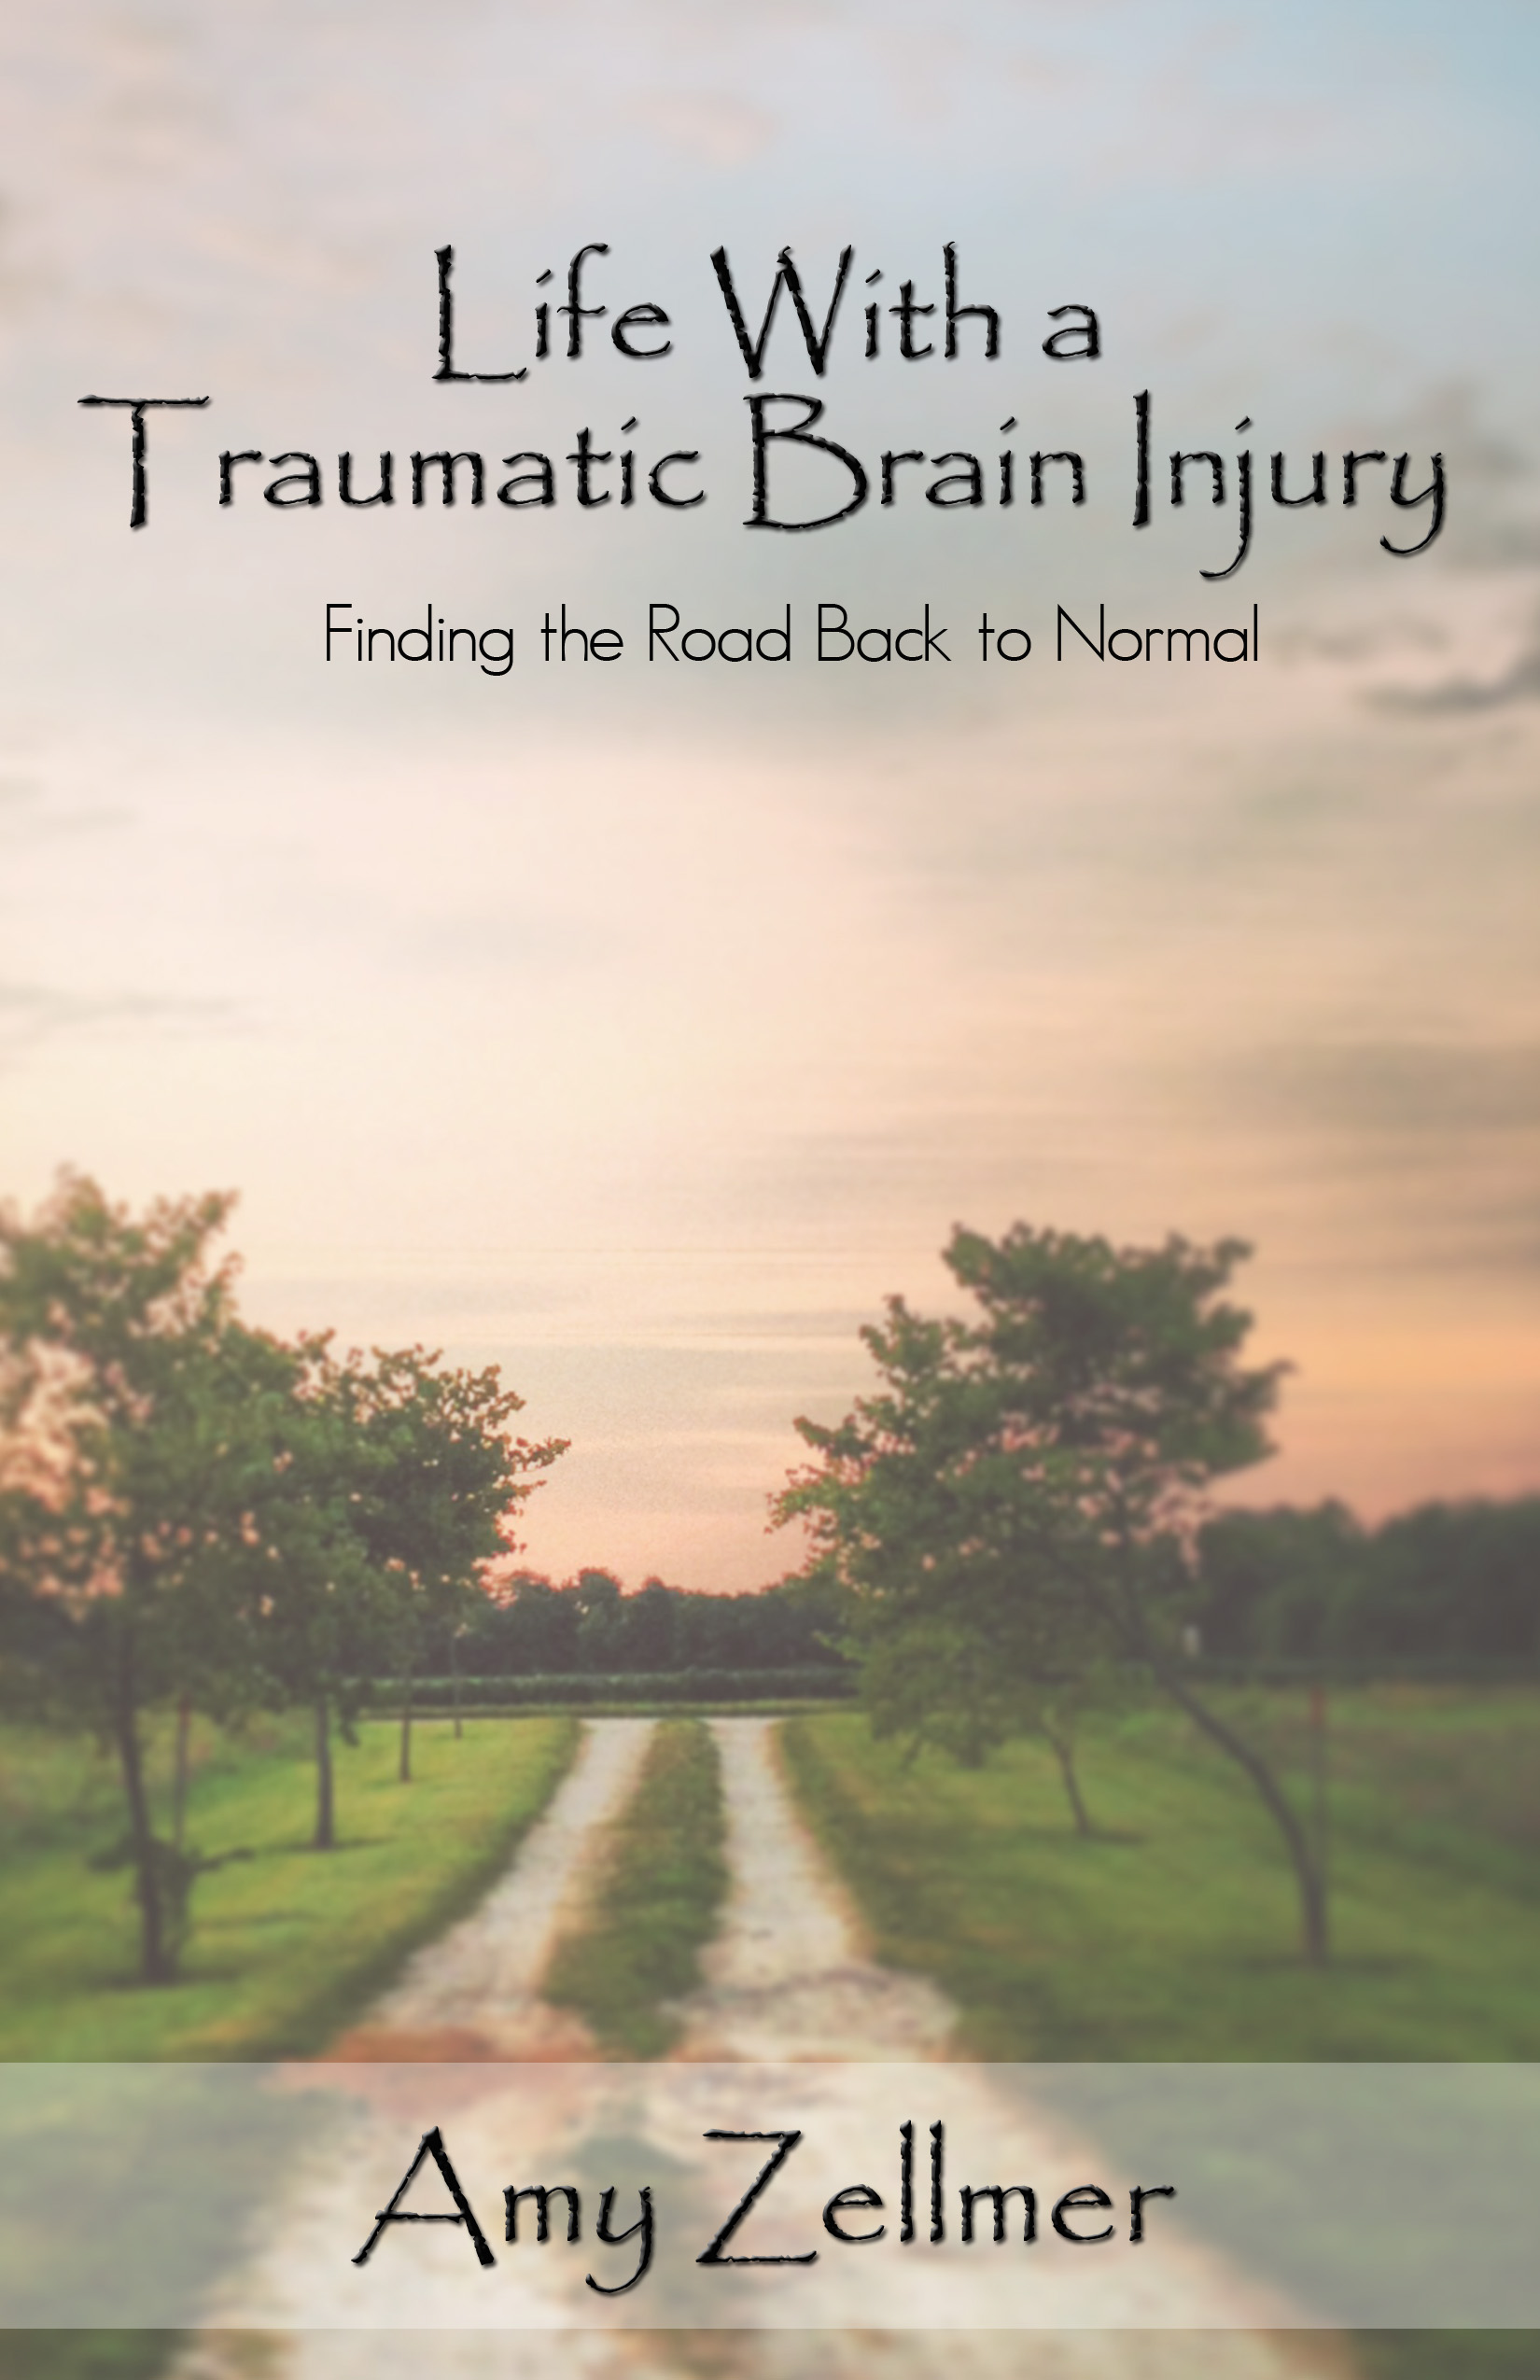 Life With a TBI author